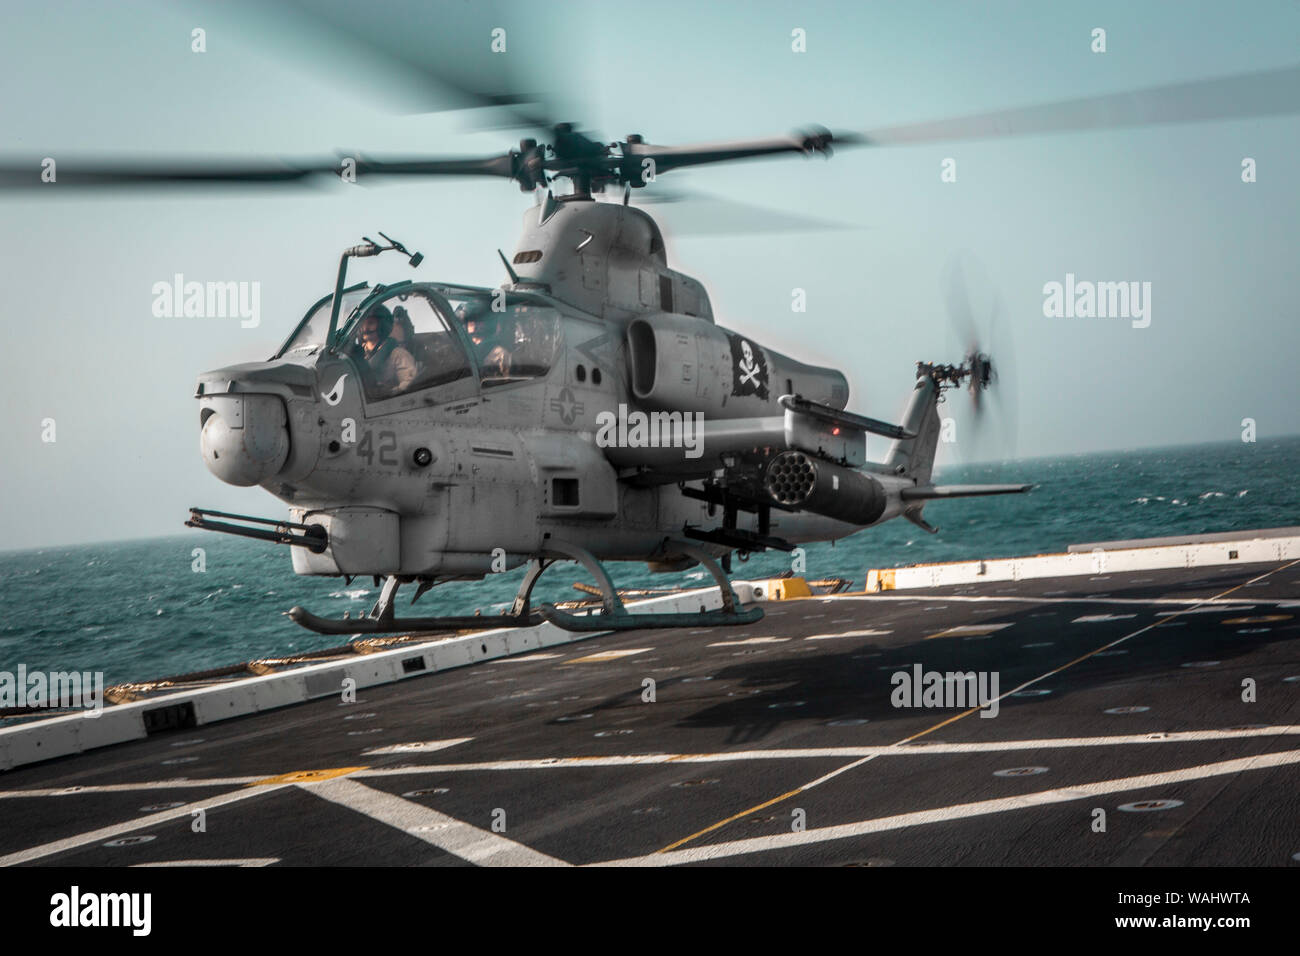 190815-M-QP663-1046 ARABIAN SEA (Aug. 15, 2019) An AH-1Z Viper attached to Marine Medium Tiltrotor Squadron (VMM) 163 (Reinforced), 11th Marine Expeditionary Unit (MEU), takes off from the flight deck of the amphibious transport dock ship USS John P. Murtha (LPD 26). The Boxer Amphibious Ready Group and 11th MEU are deployed to the U.S. 5th Fleet area of operations in support of naval operations to ensure maritime stability and security in the Central Region, connecting the Mediterranean and the Pacific through the Western Indian Ocean and three strategic choke points. (U.S. Marine Corps photo Stock Photo